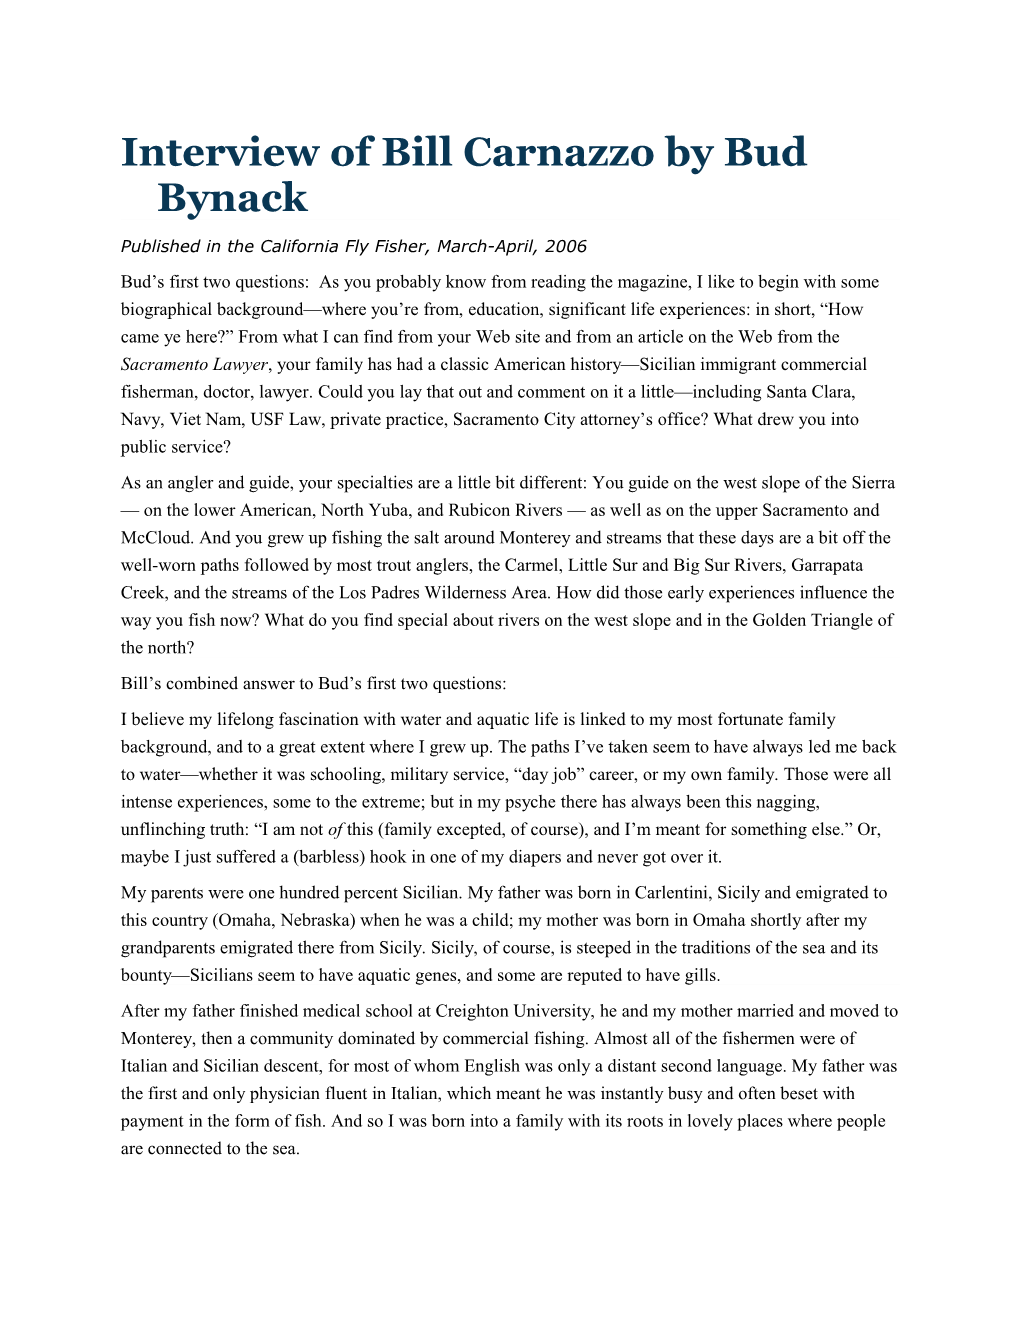 Interview of Bill Carnazzo by Bud Bynack